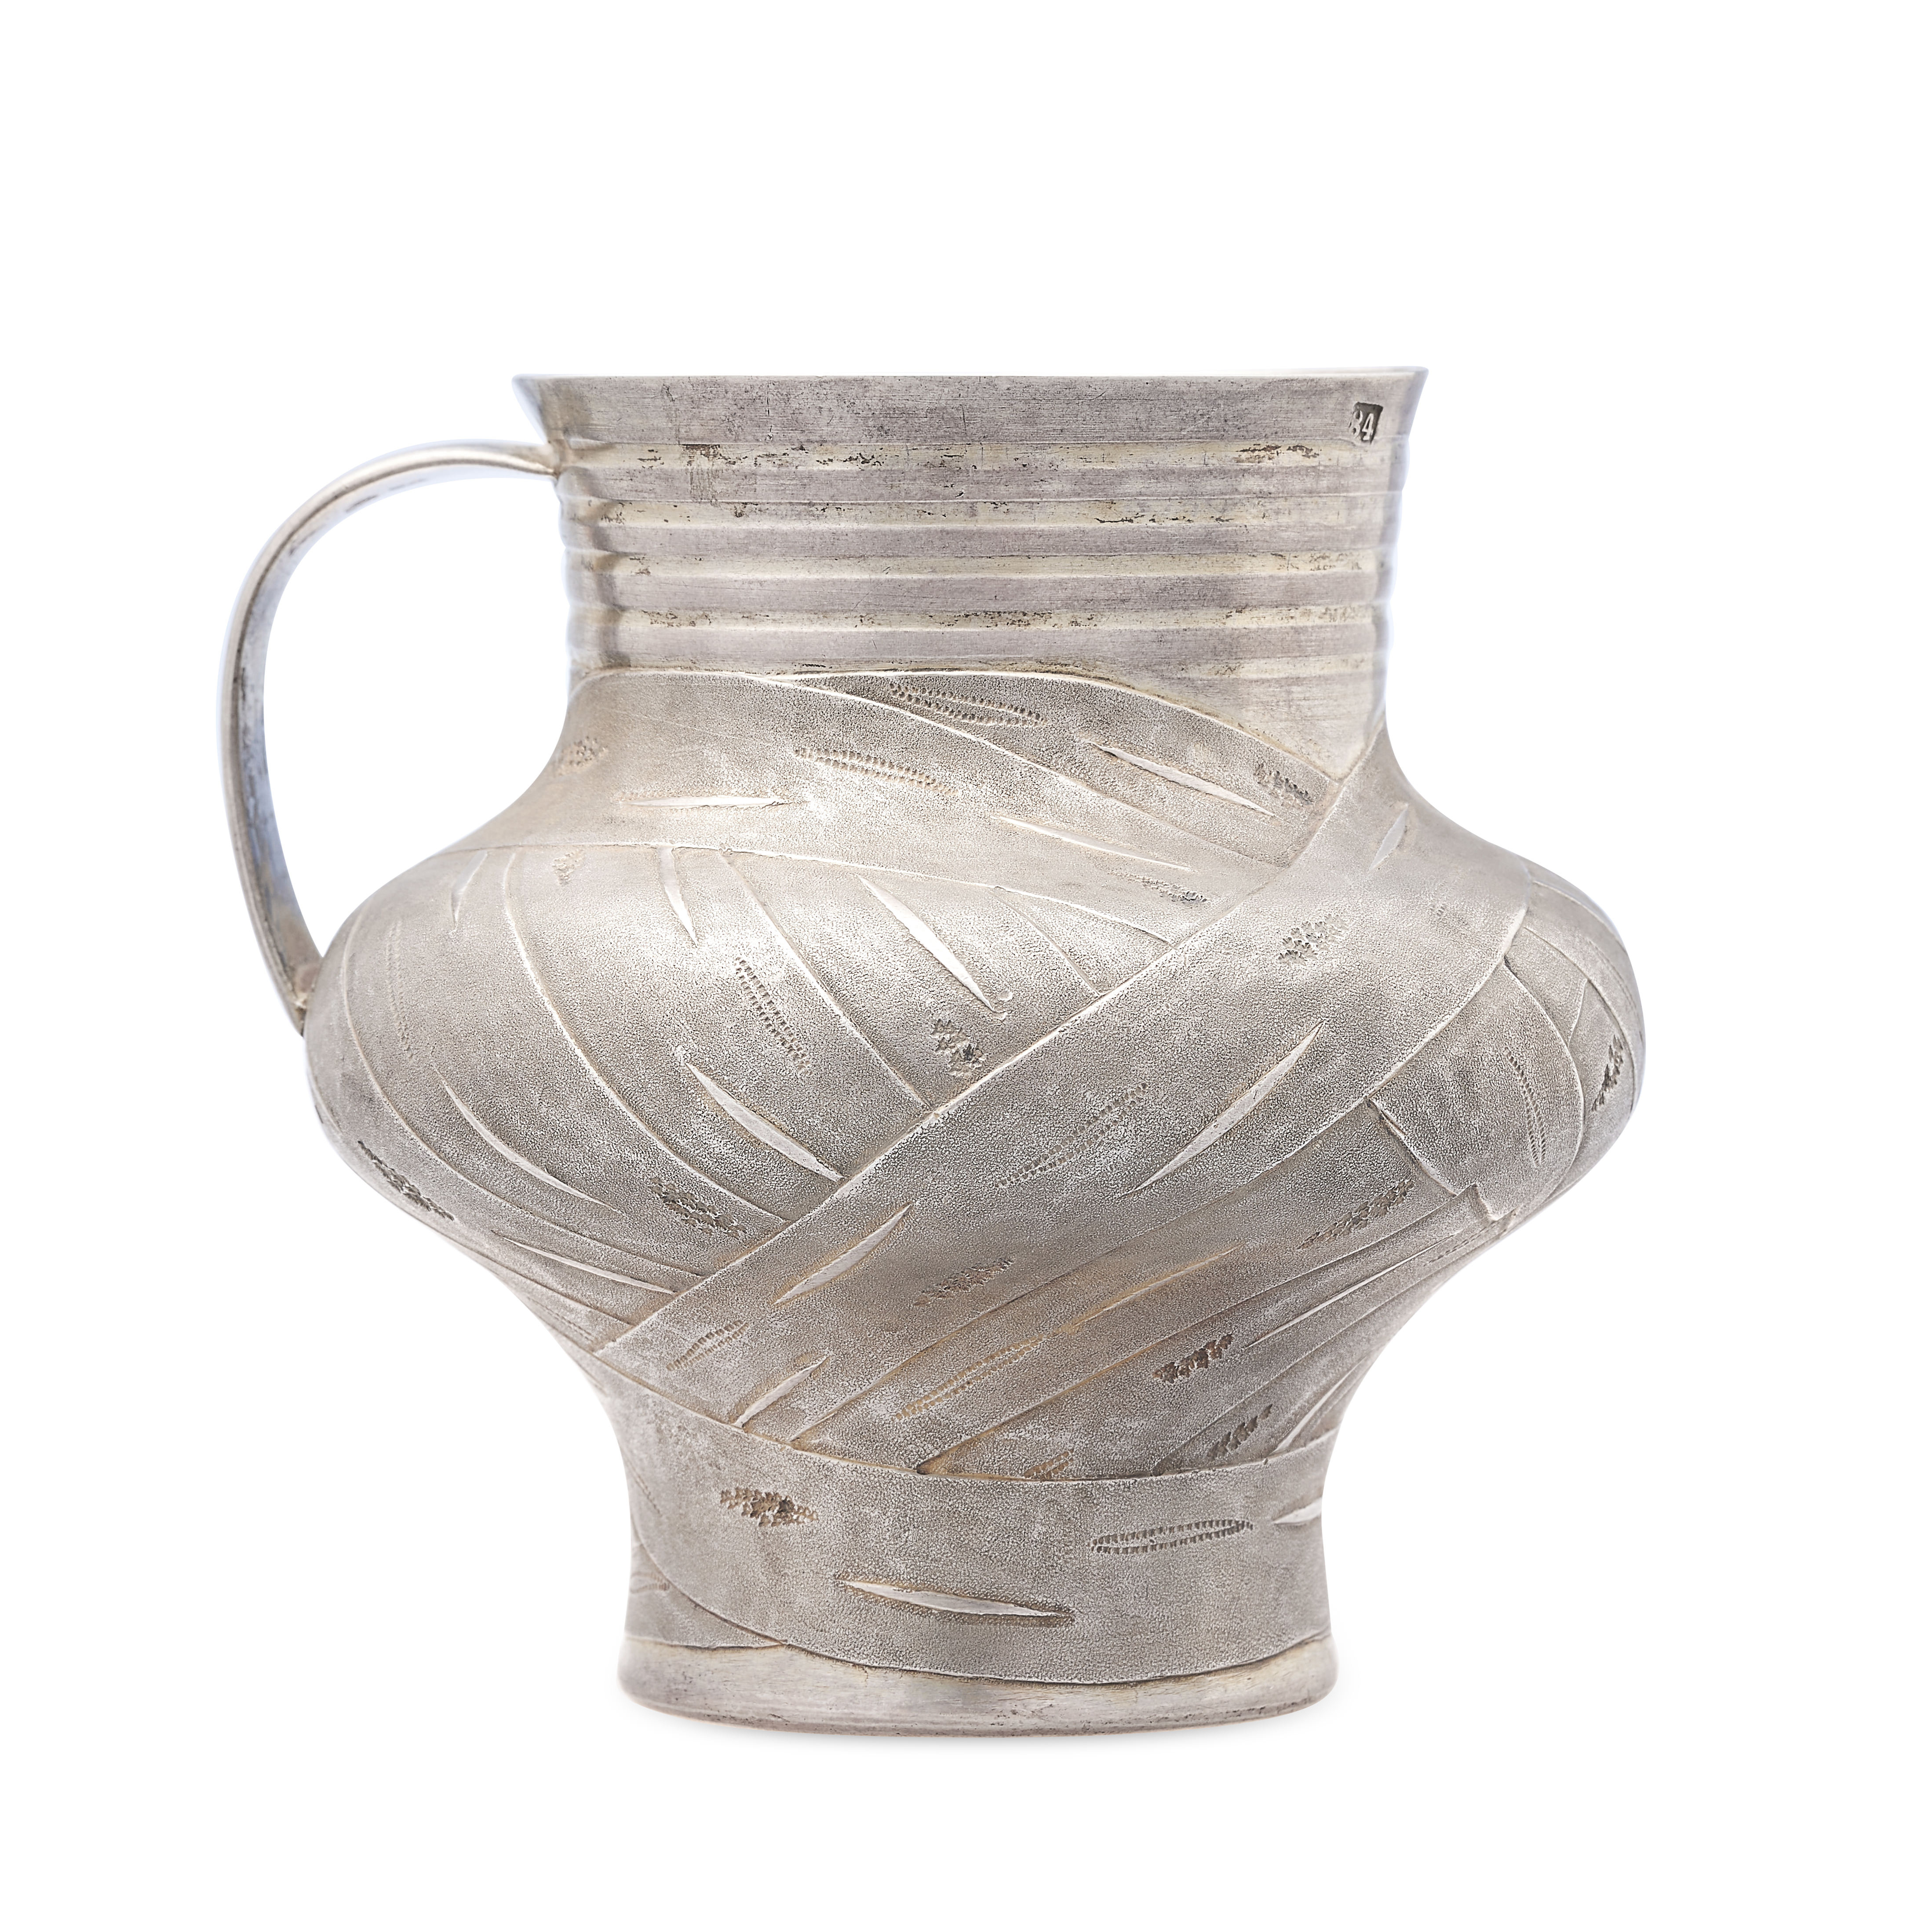 AN ANTIQUE IMPERIAL RUSSIAN SILVER CREAM / MILK JUG, MOSCOW 1866 in 84 zolotnik silver, maker's mark